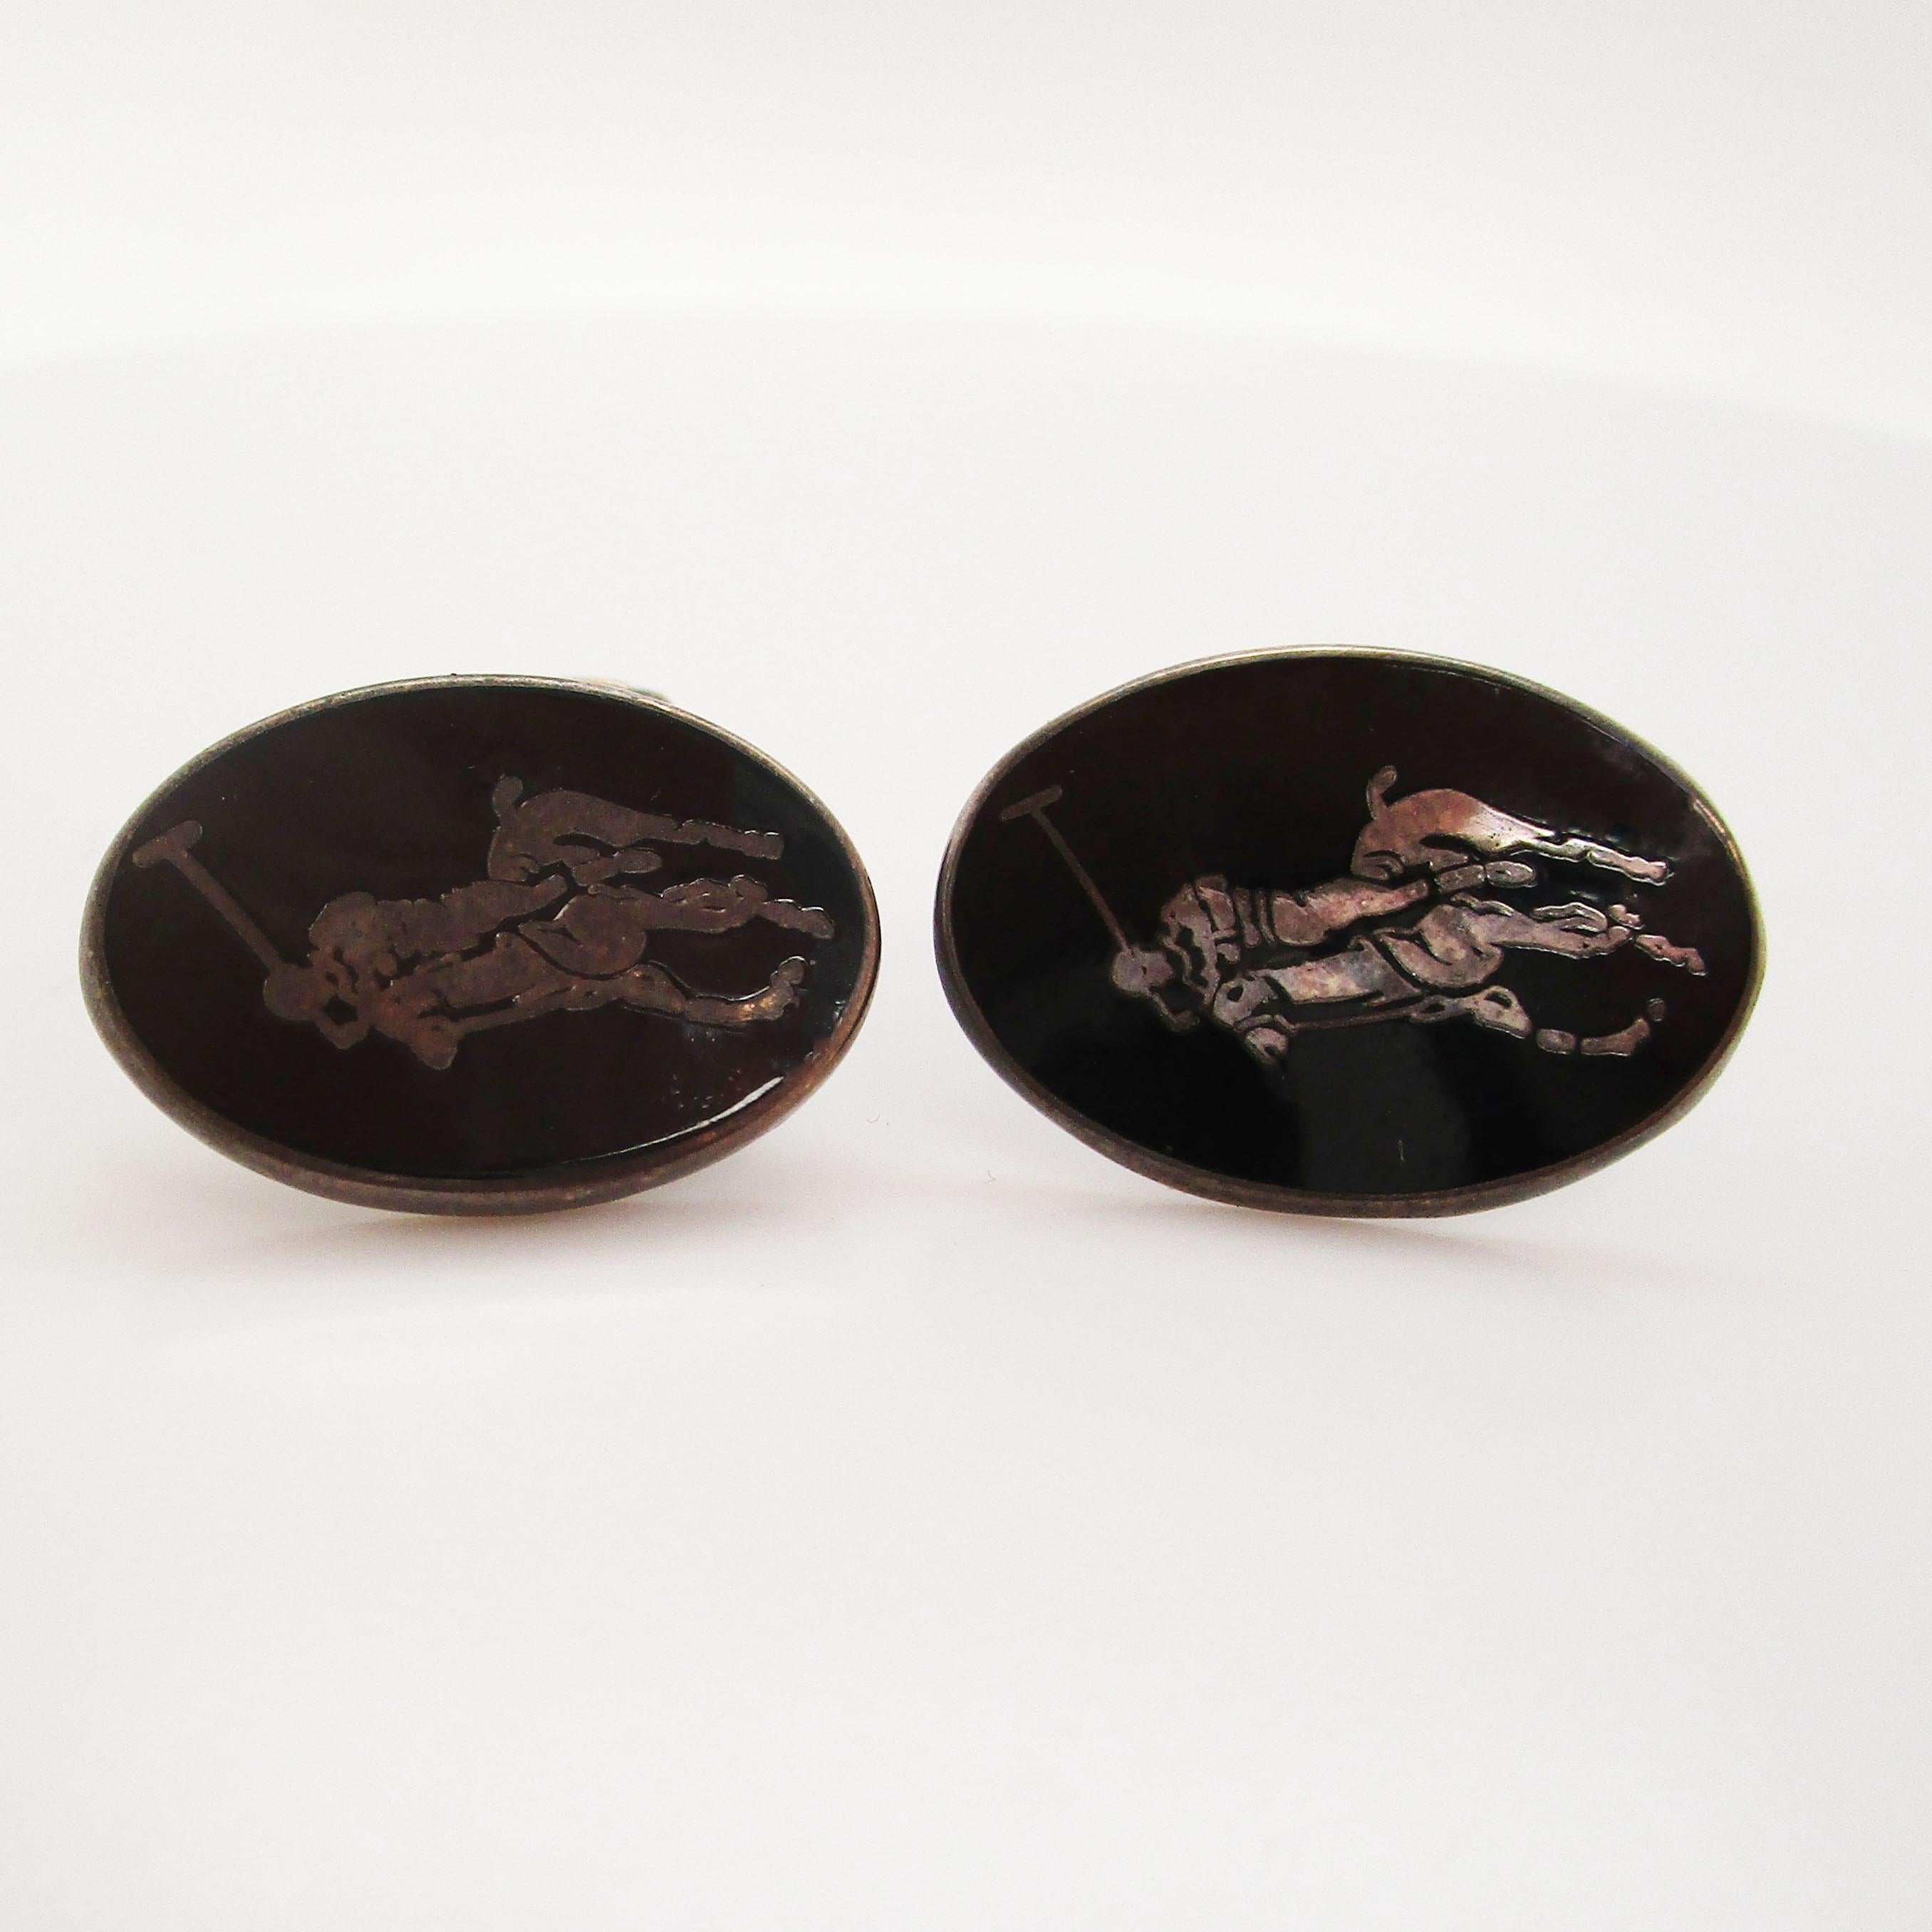 These elegant cufflinks are in sterling silver and feature black enamel which creates a dramatic contrast and a sophisticated finished look. The panels feature a polo player atop his horse. These are the ideal cufflinks for the man who appreciates